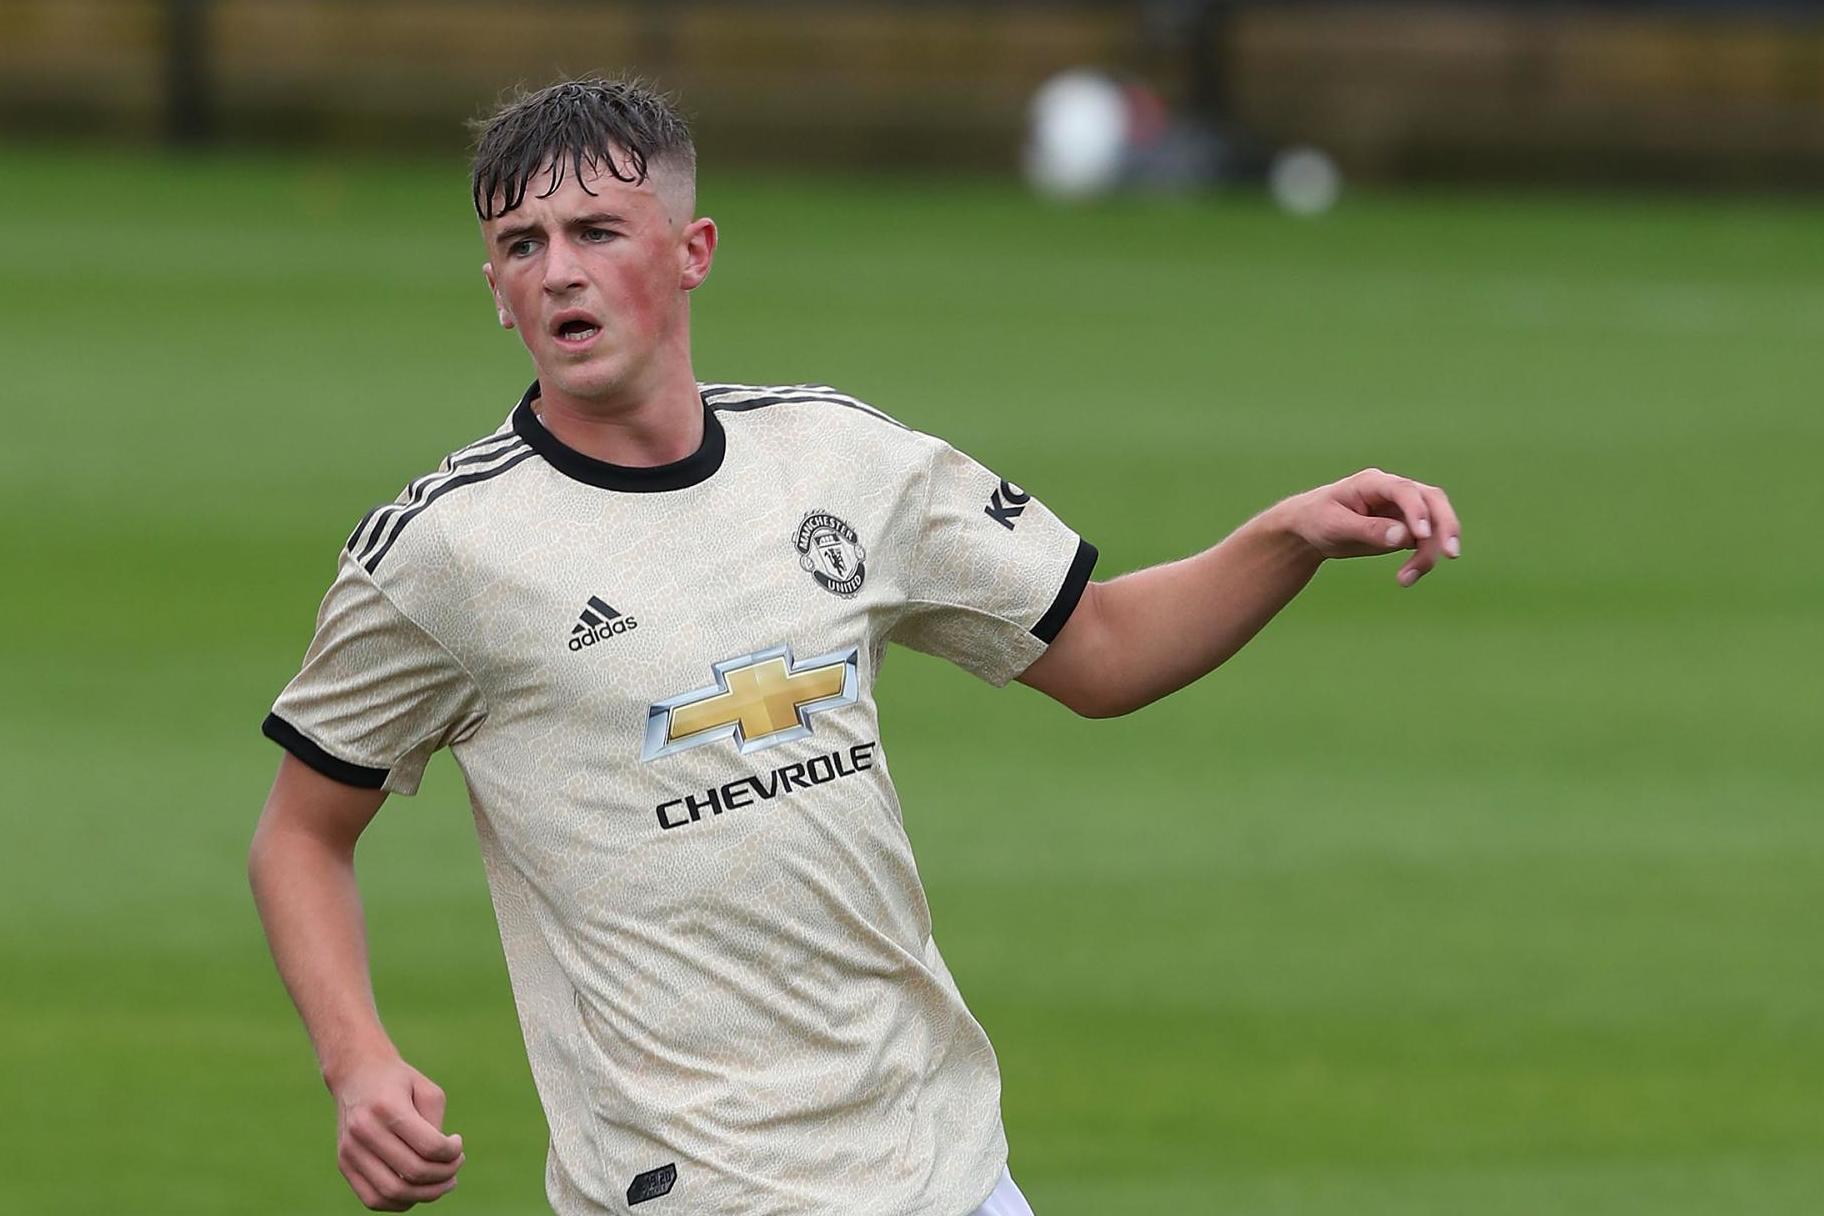 Manchester United youngster Charlie Wellens